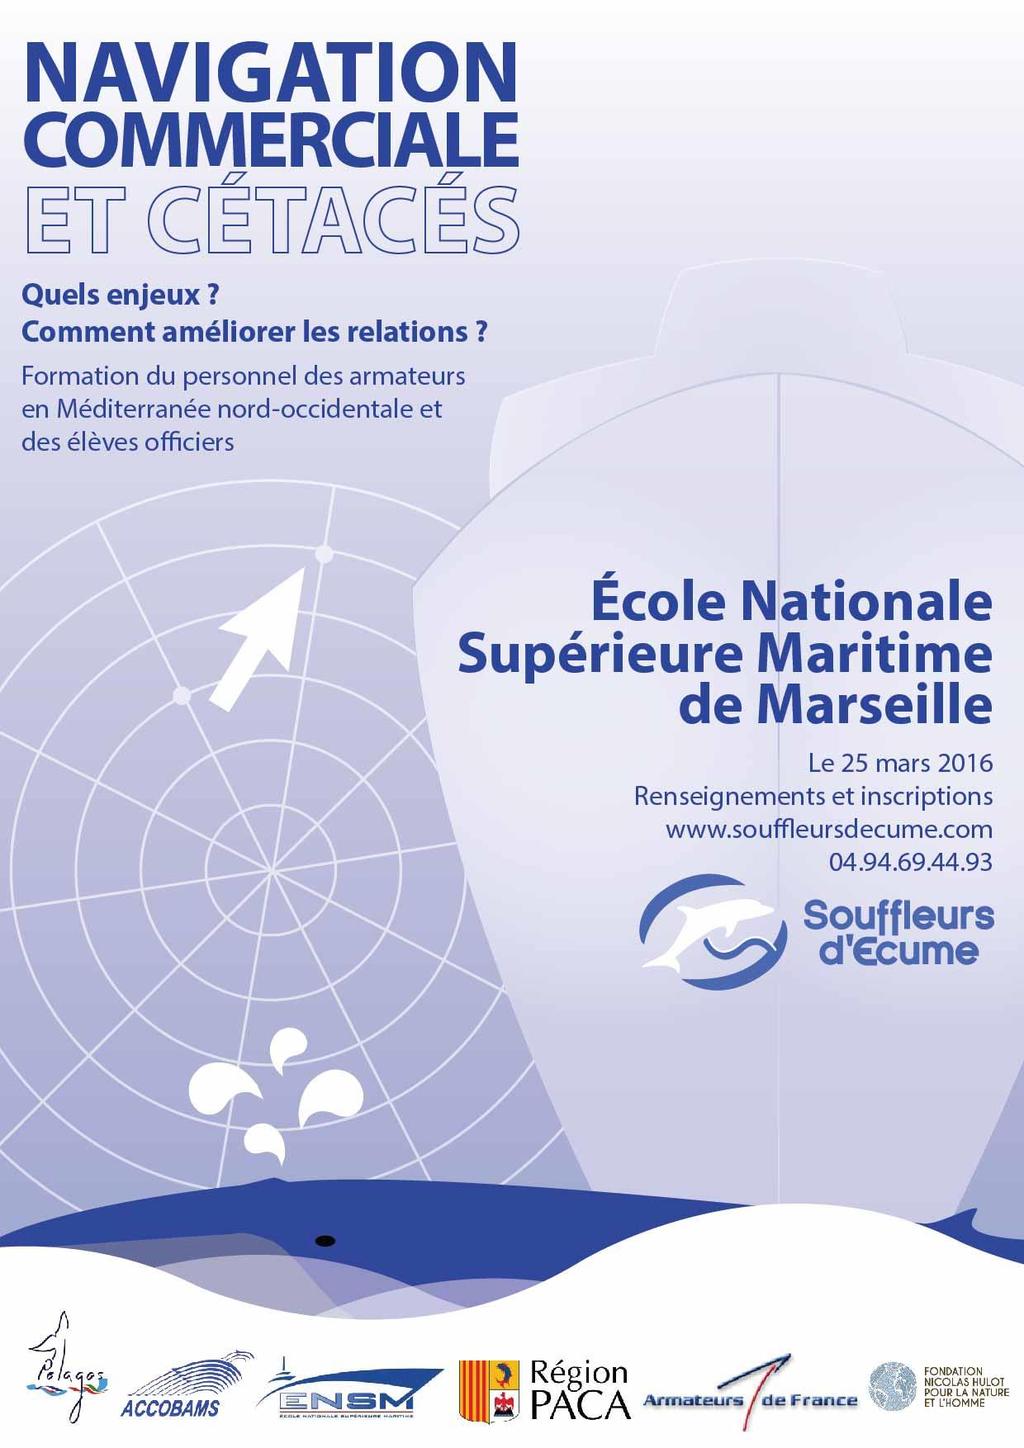 ENSM Conservation 2016 des training cétacés de course Méditerranée report and prospects for 2017 COMMERCIAL SHIPPING AND CETACEANS What is at stake? How to improve relations?